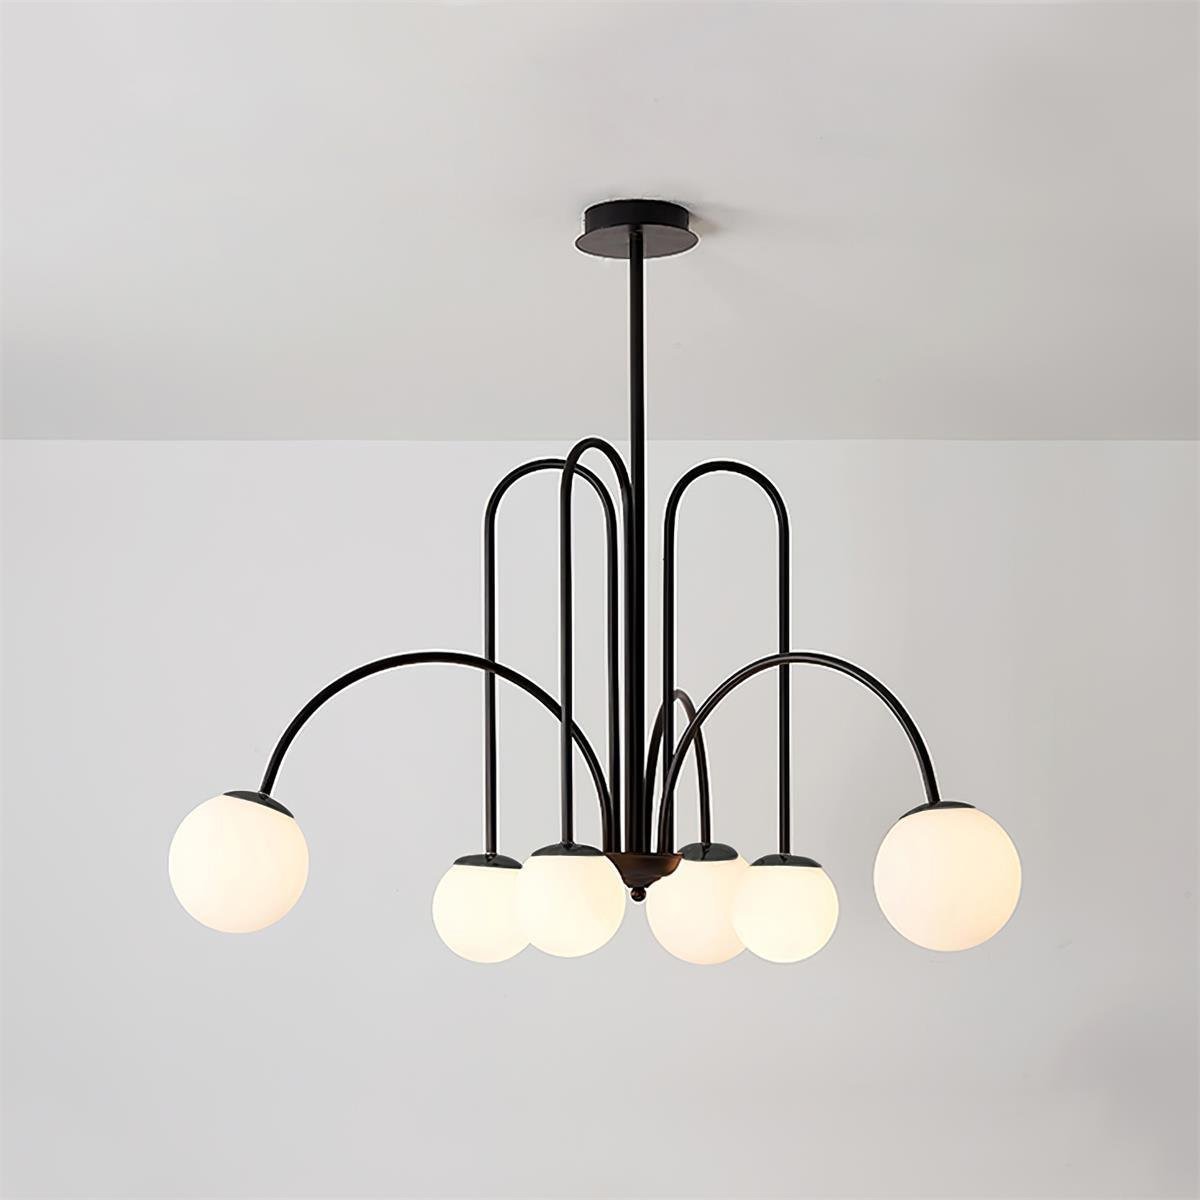 Black Delaney Chandelier with 6 Heads, measuring 30.7 inches in diameter and 31.5 inches in height (or 78cm x 80cm ).